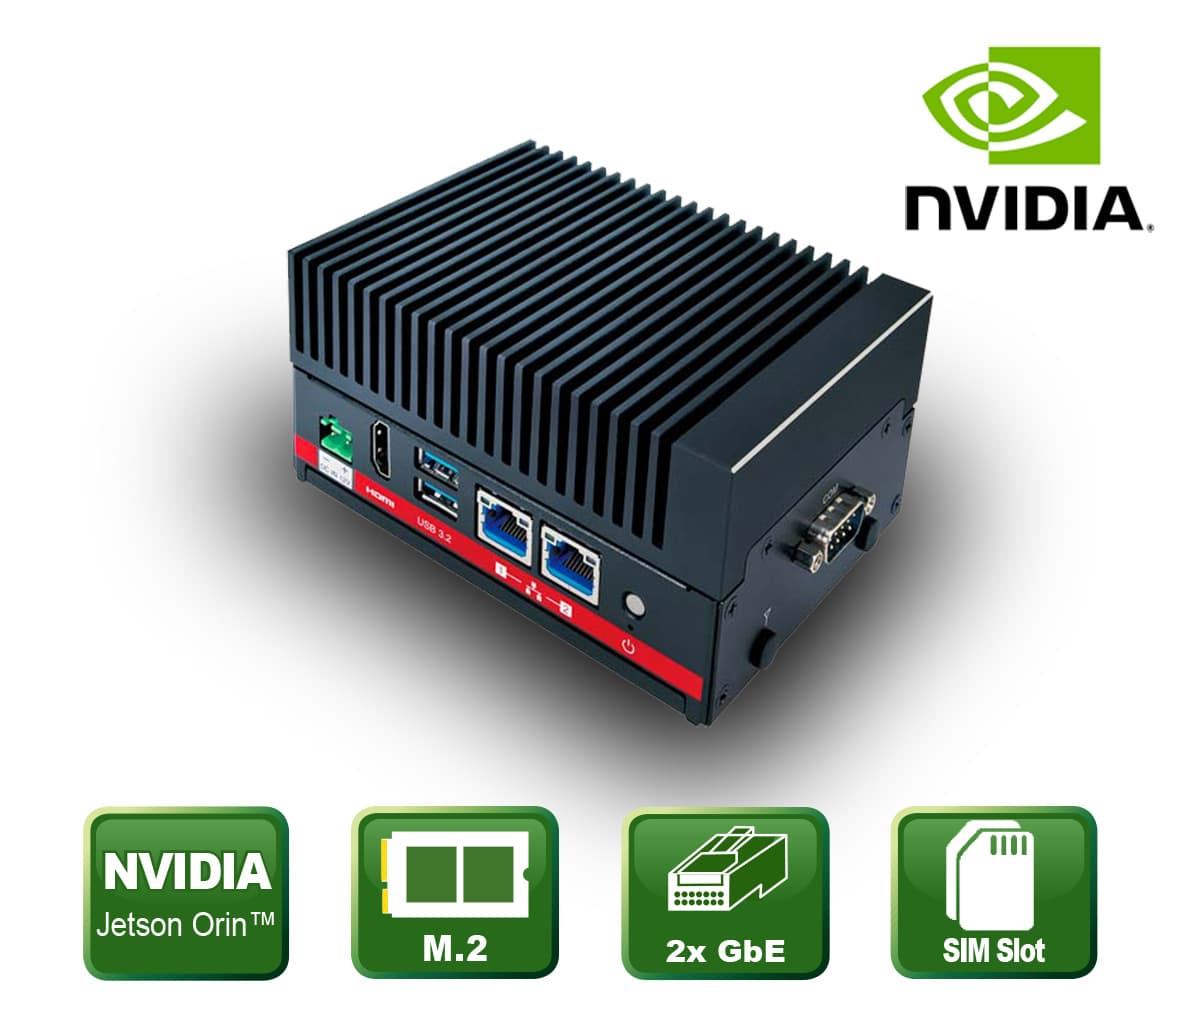 Fanless high performance computer with Nvidia Jetson processor